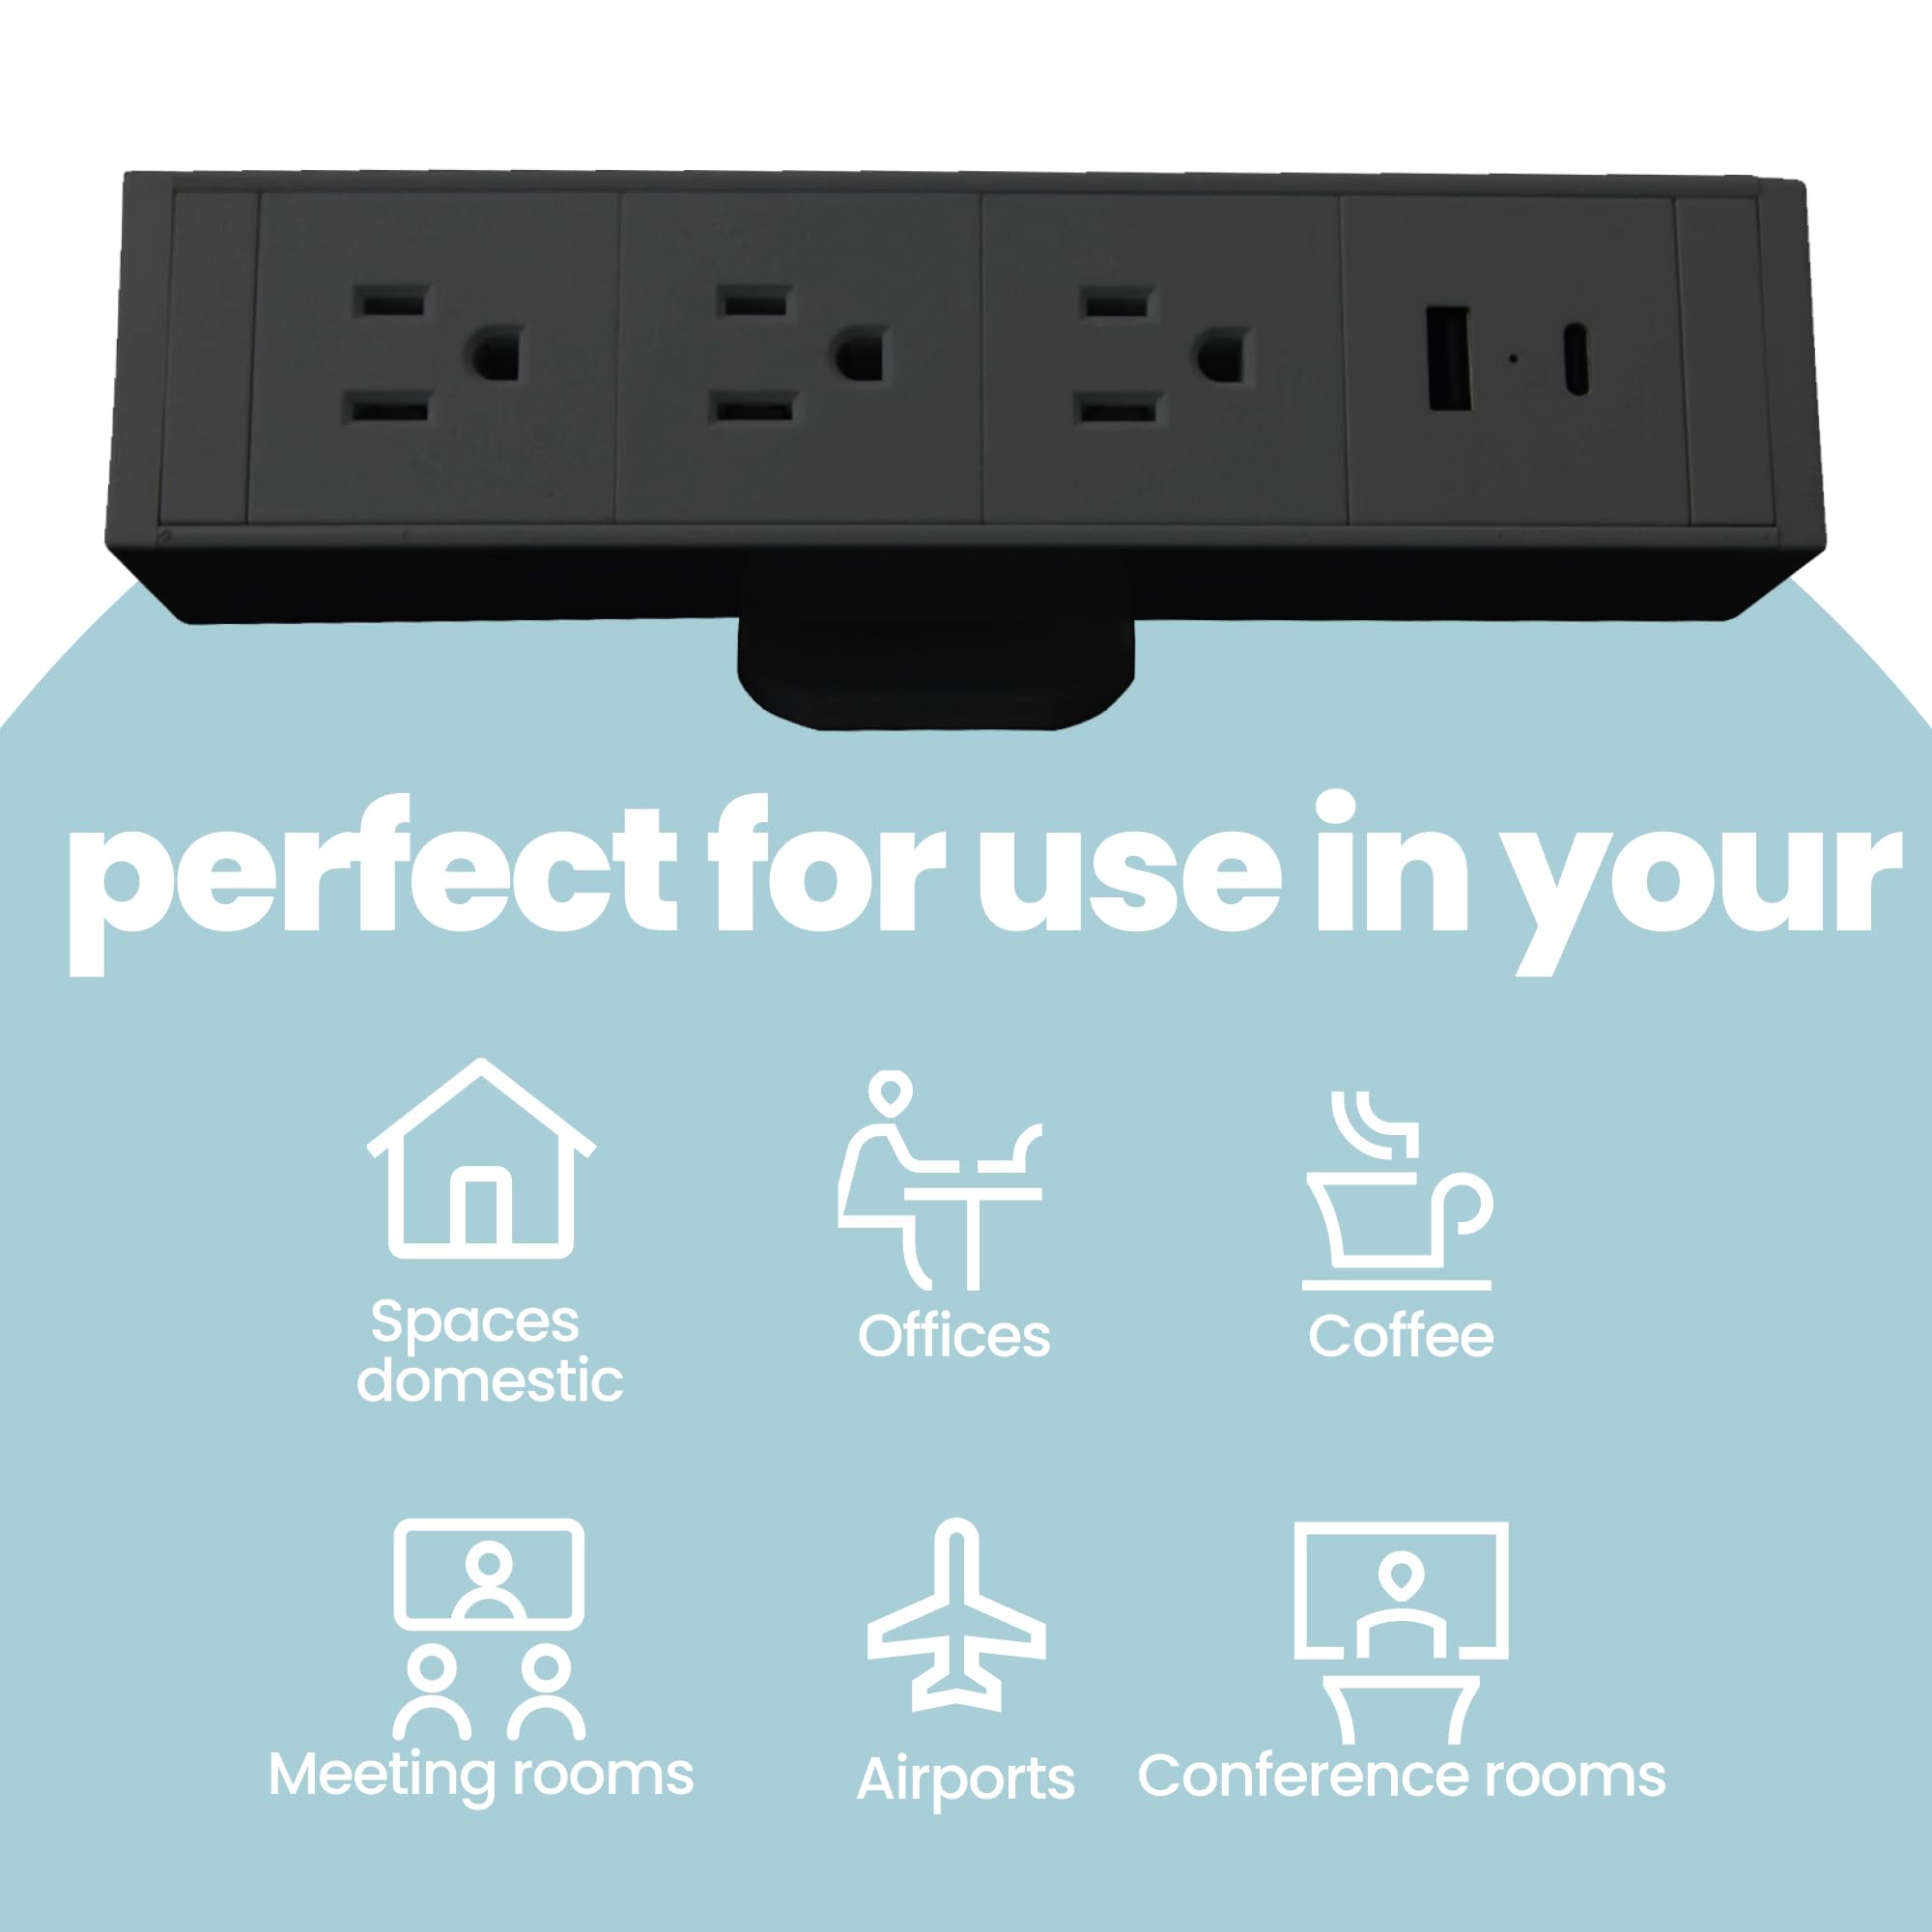 Fohfurniture 5-in-1 Fast Charging, Sliding Desk Clamp Power Strip with 3 AC Outlet Ports, 1 USB-A Port, and 1 USB-C Port and 6ft Cord (Black)